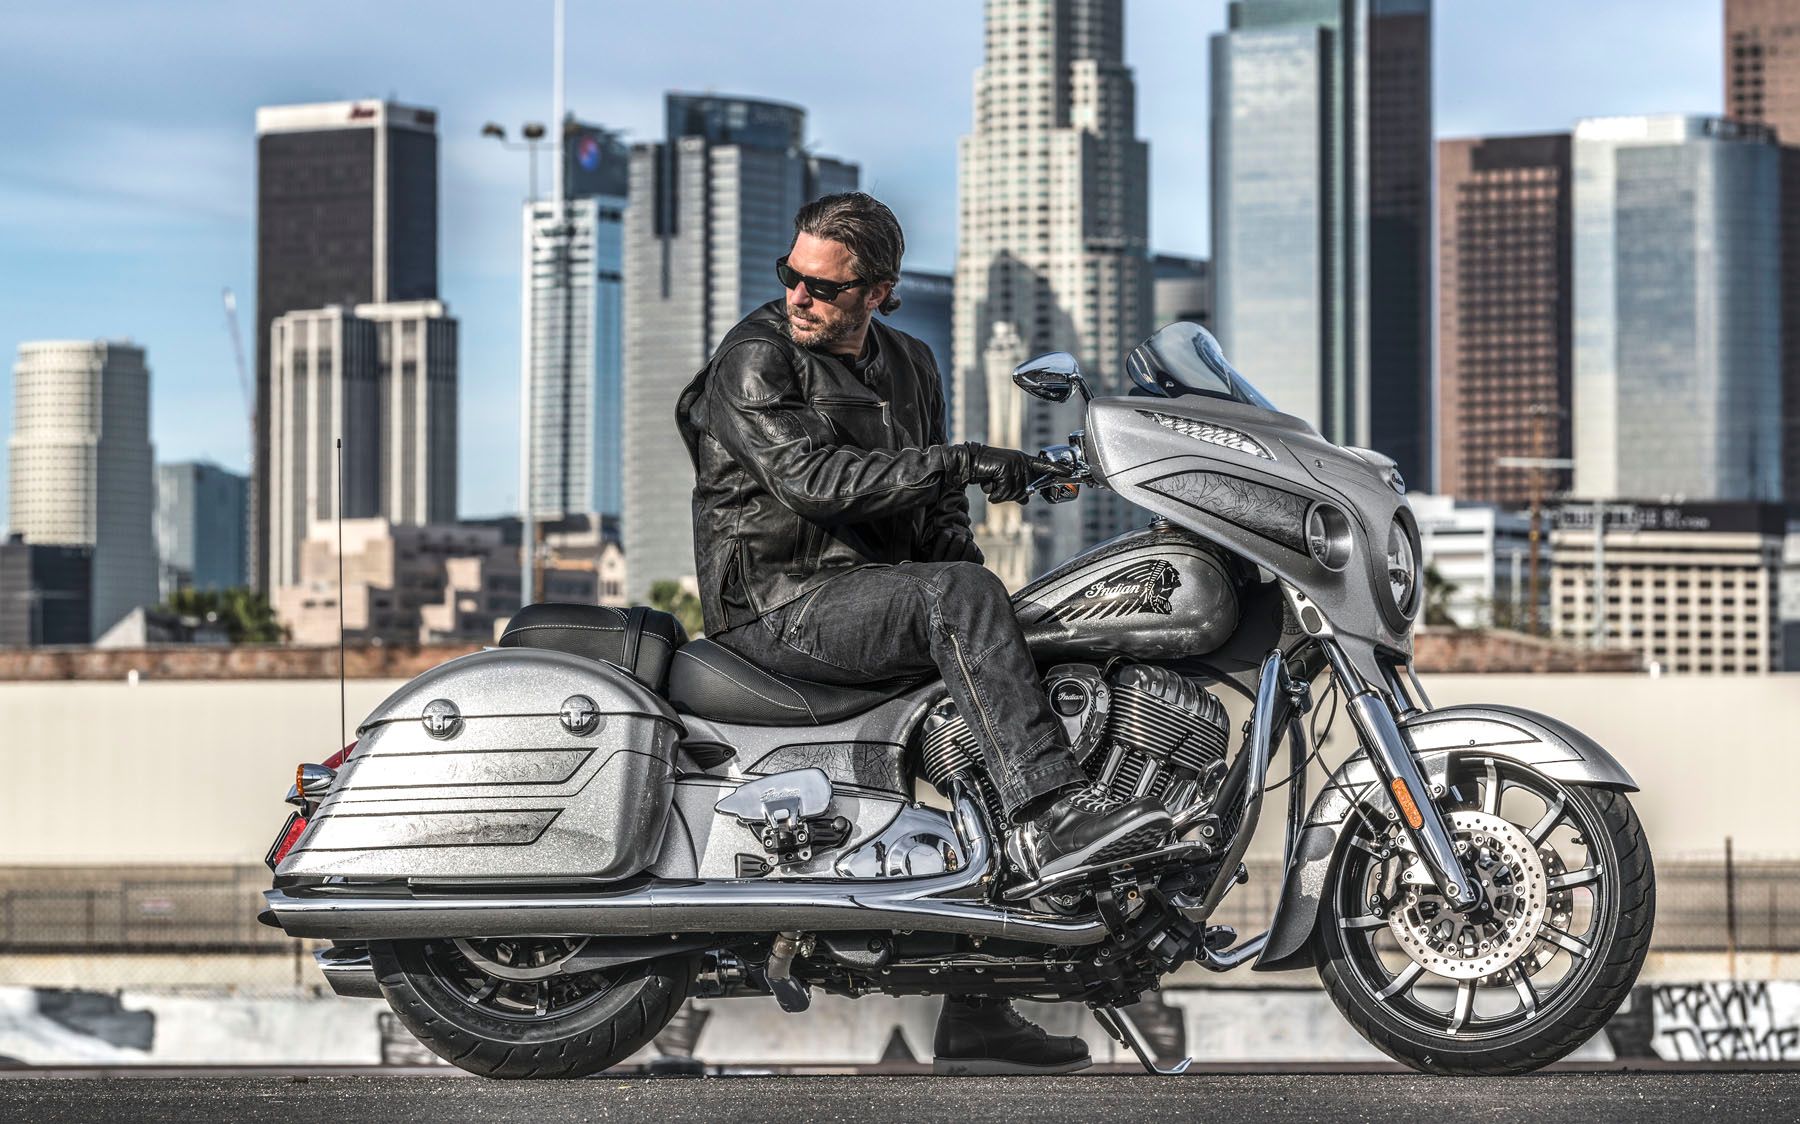 2018 Indian Motorcycles launched the new Chieftain Elite